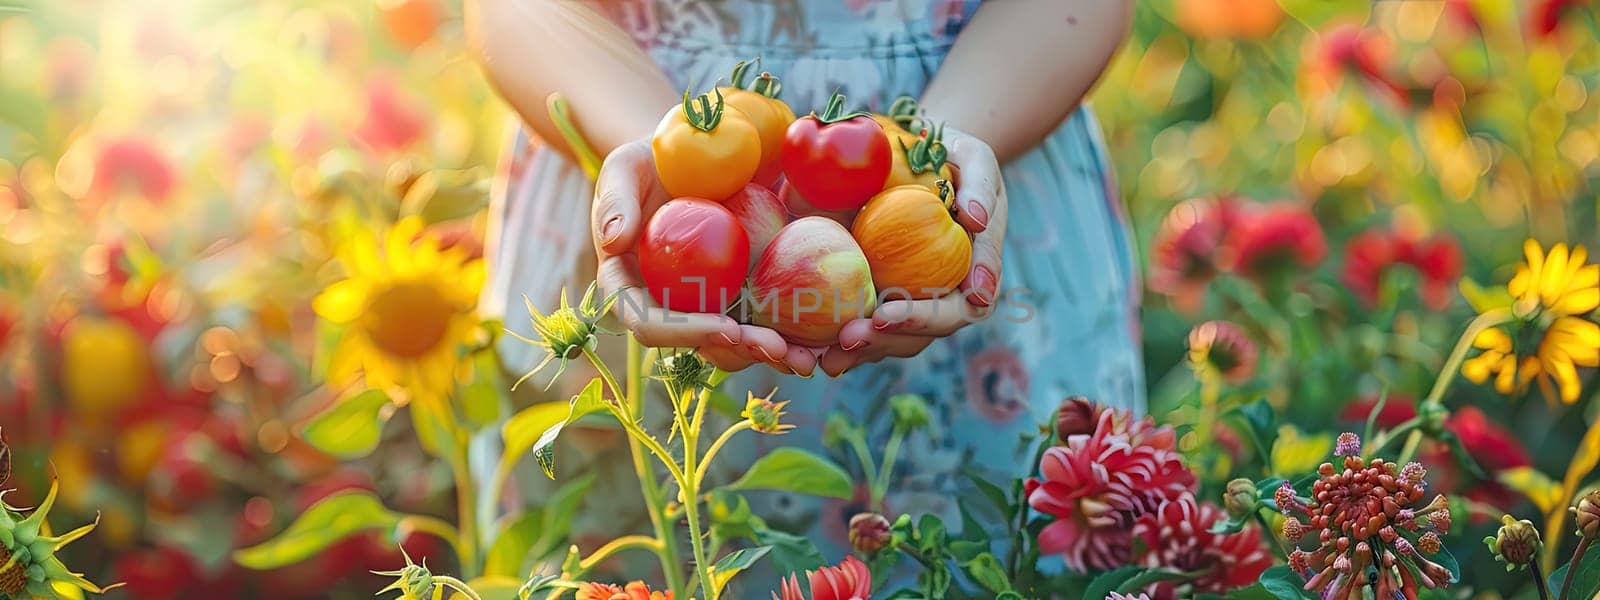 Harvest in the hands of a woman in the garden. Selective focus. by yanadjana